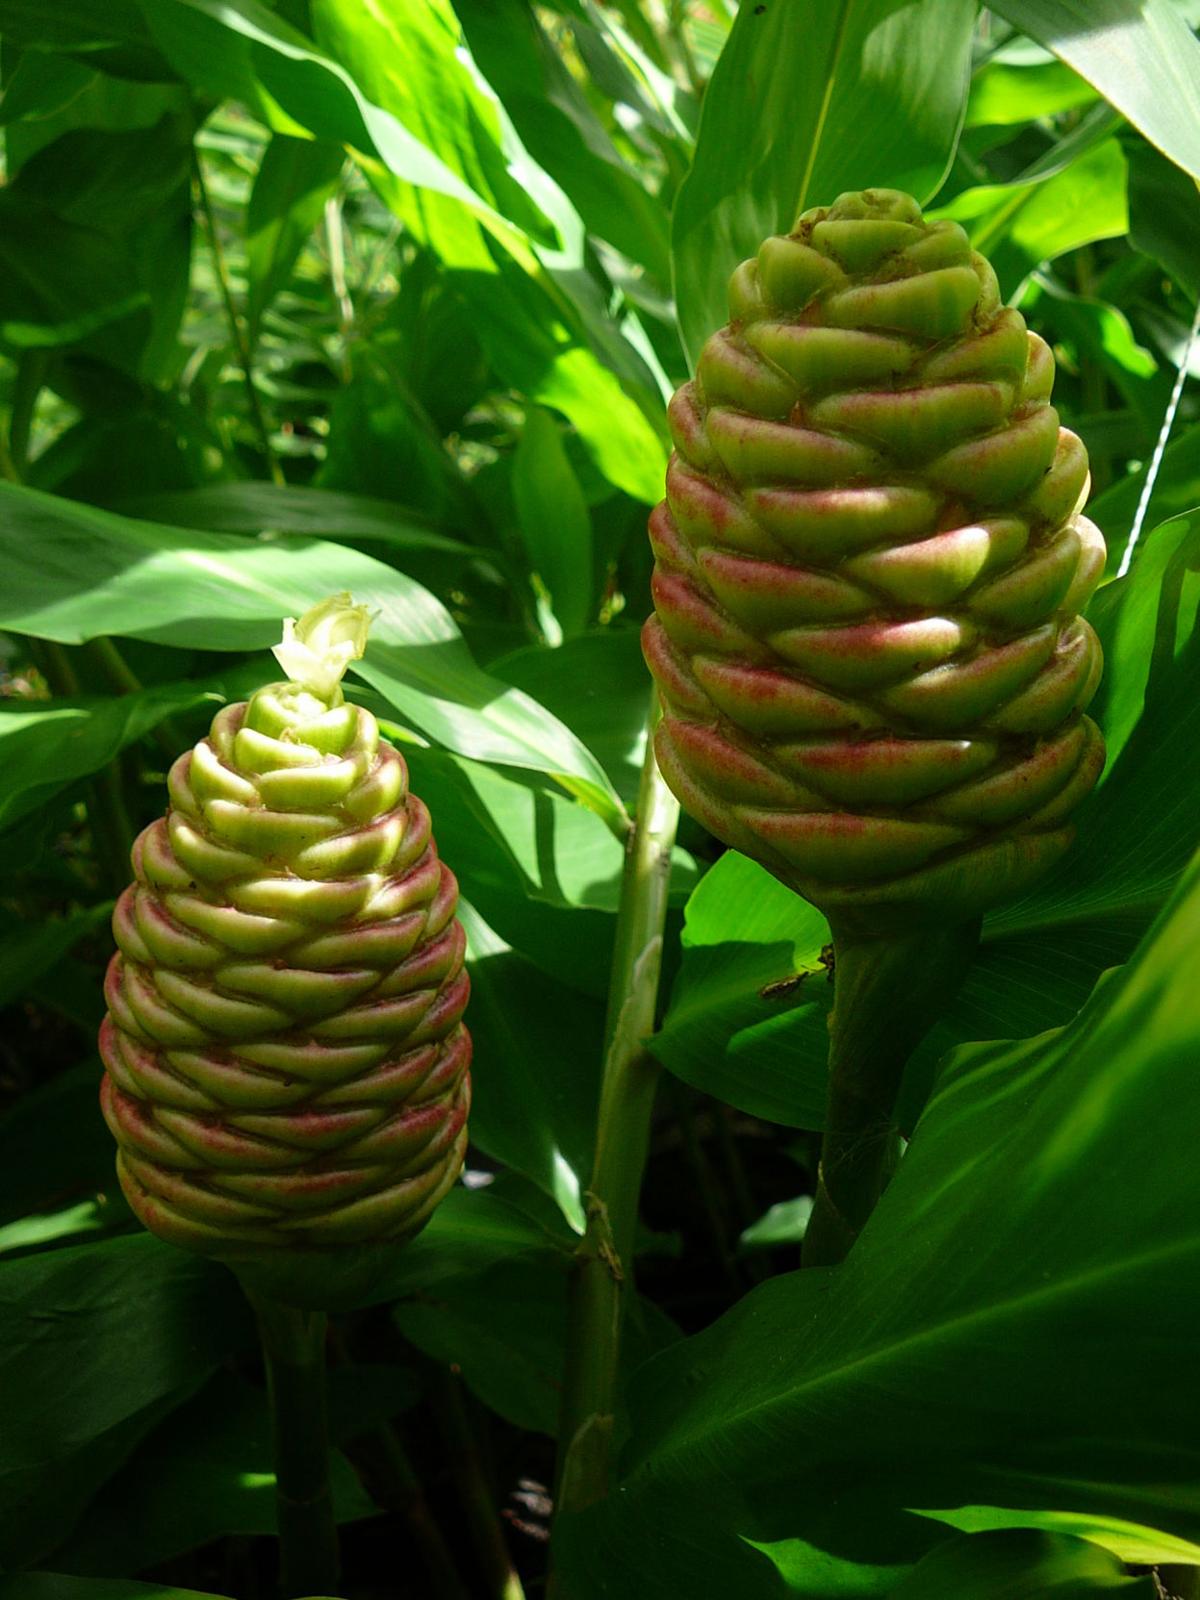 Pinecone Ginger Edible Medicinal And Pretty Too Real Estate Chronicleonline Com